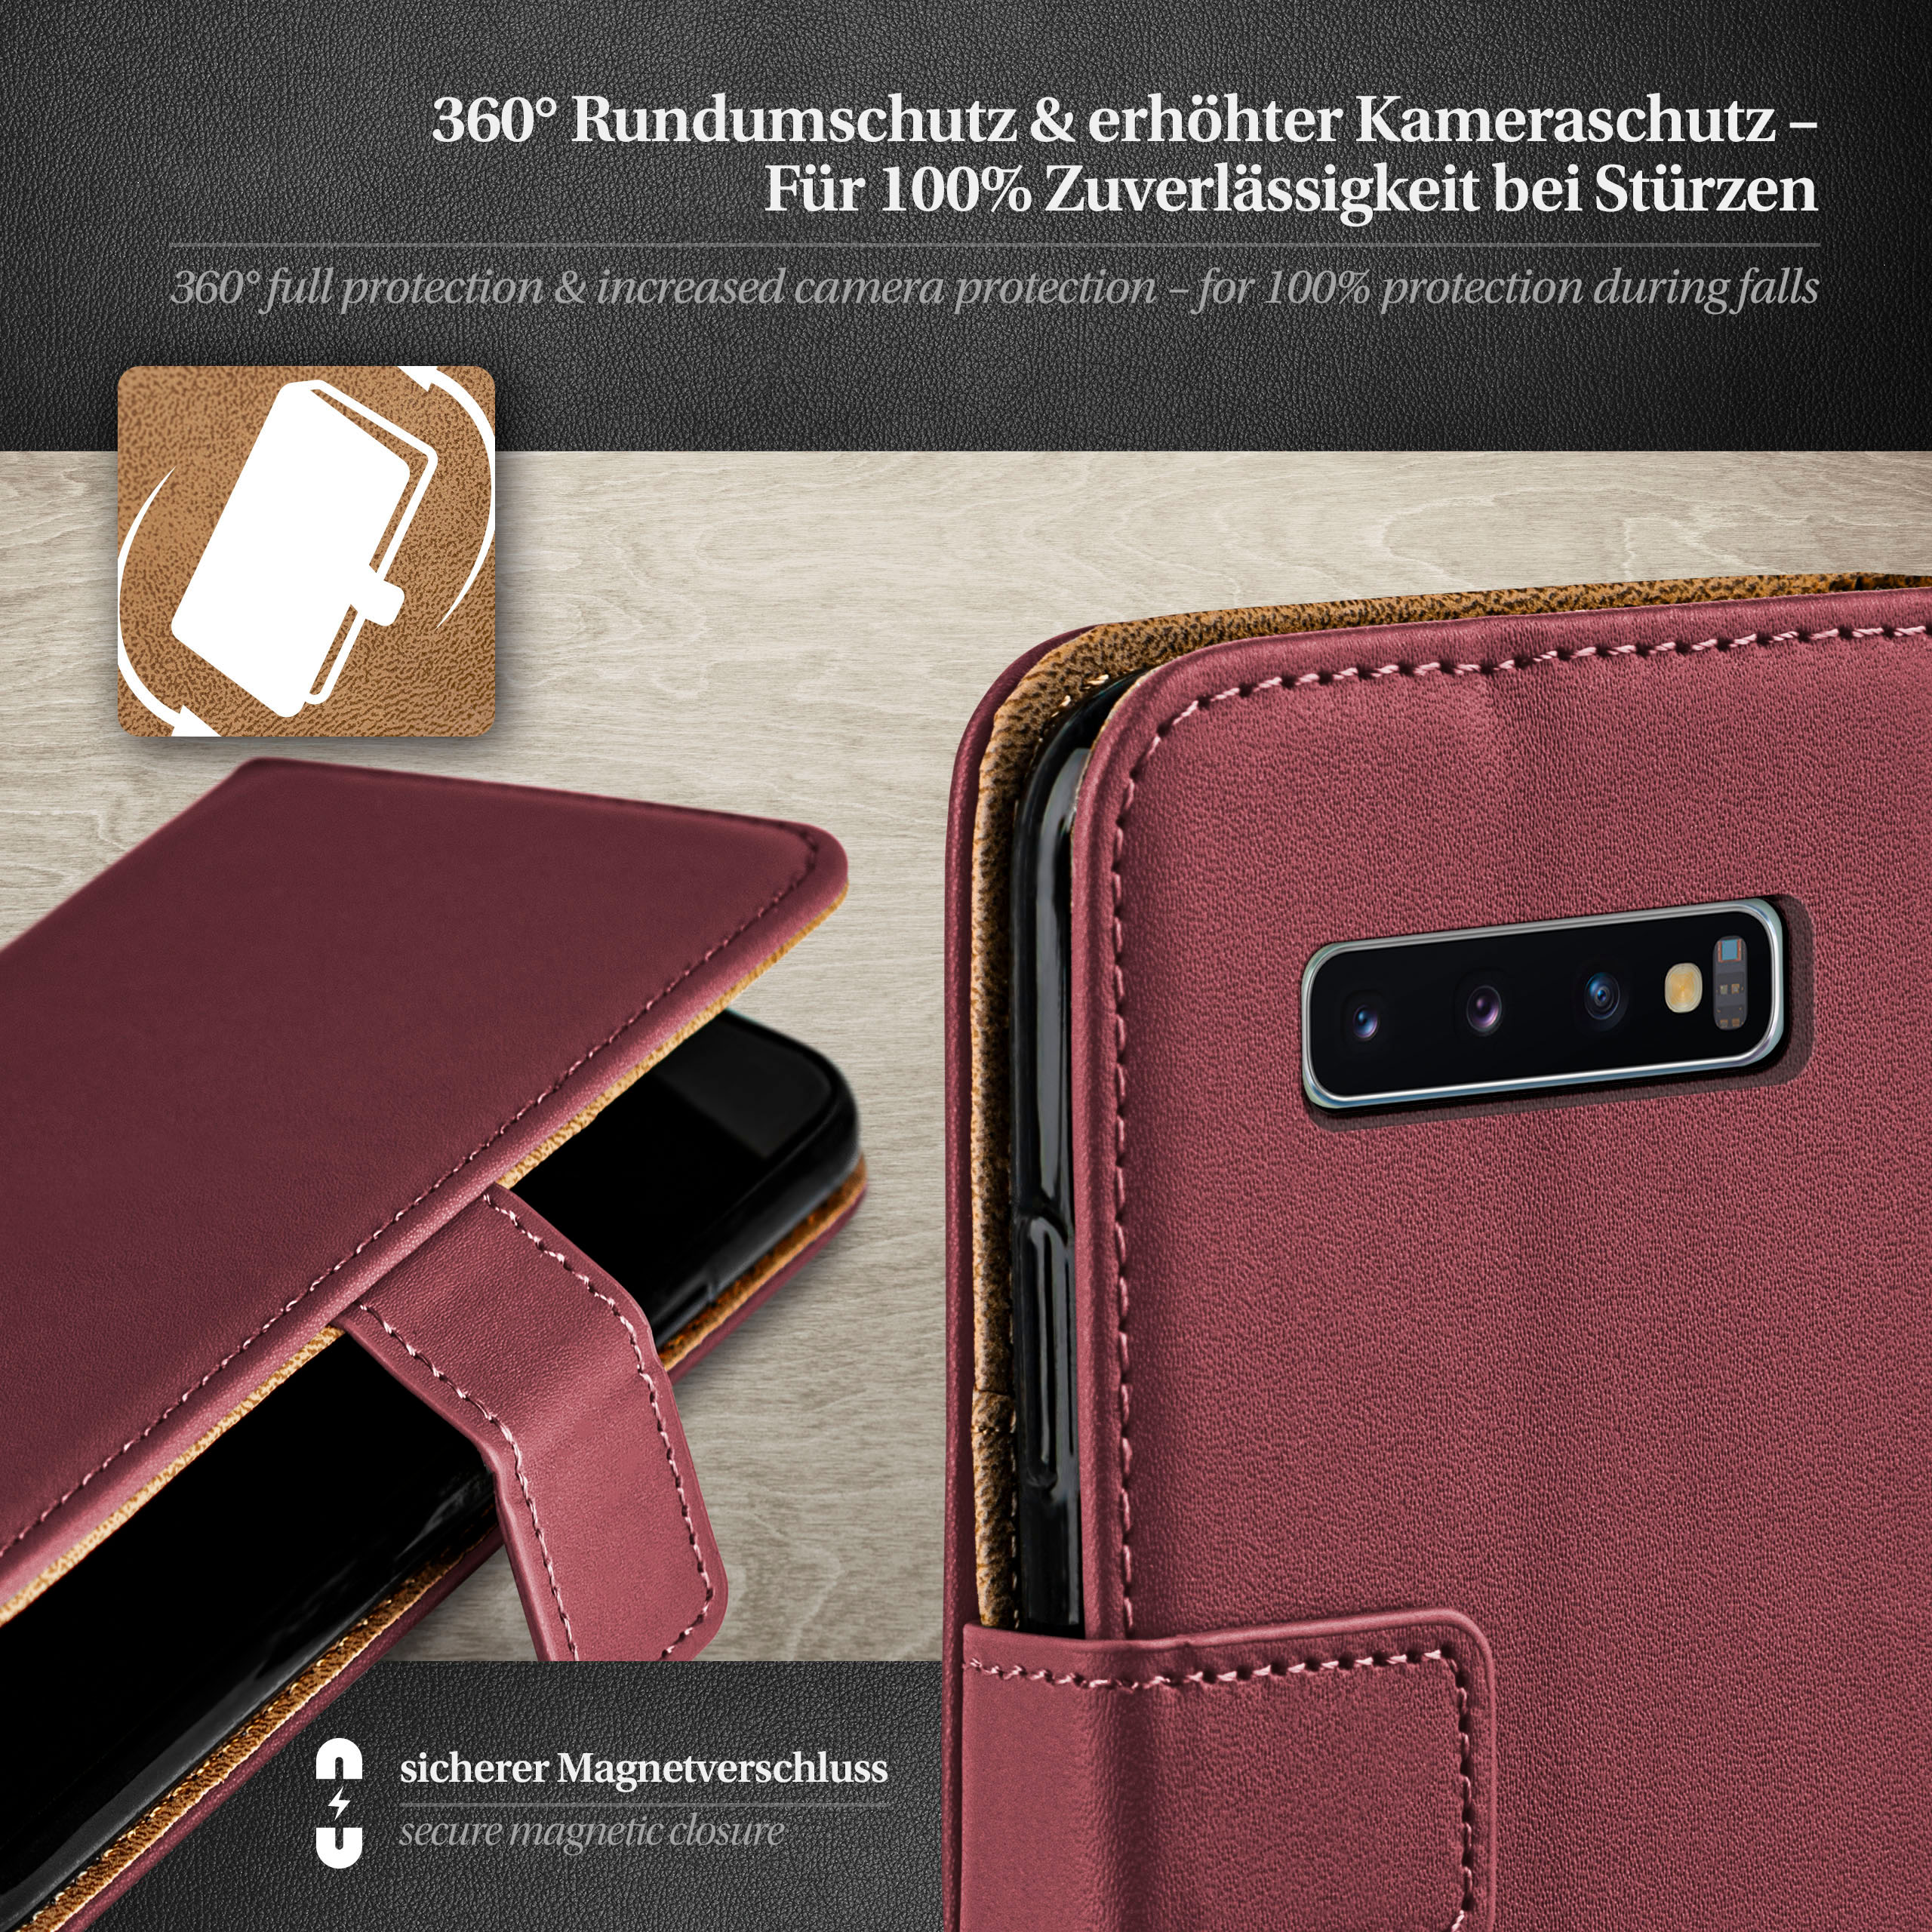 Galaxy Samsung, S10, Maroon-Red MOEX Book Case, Bookcover,